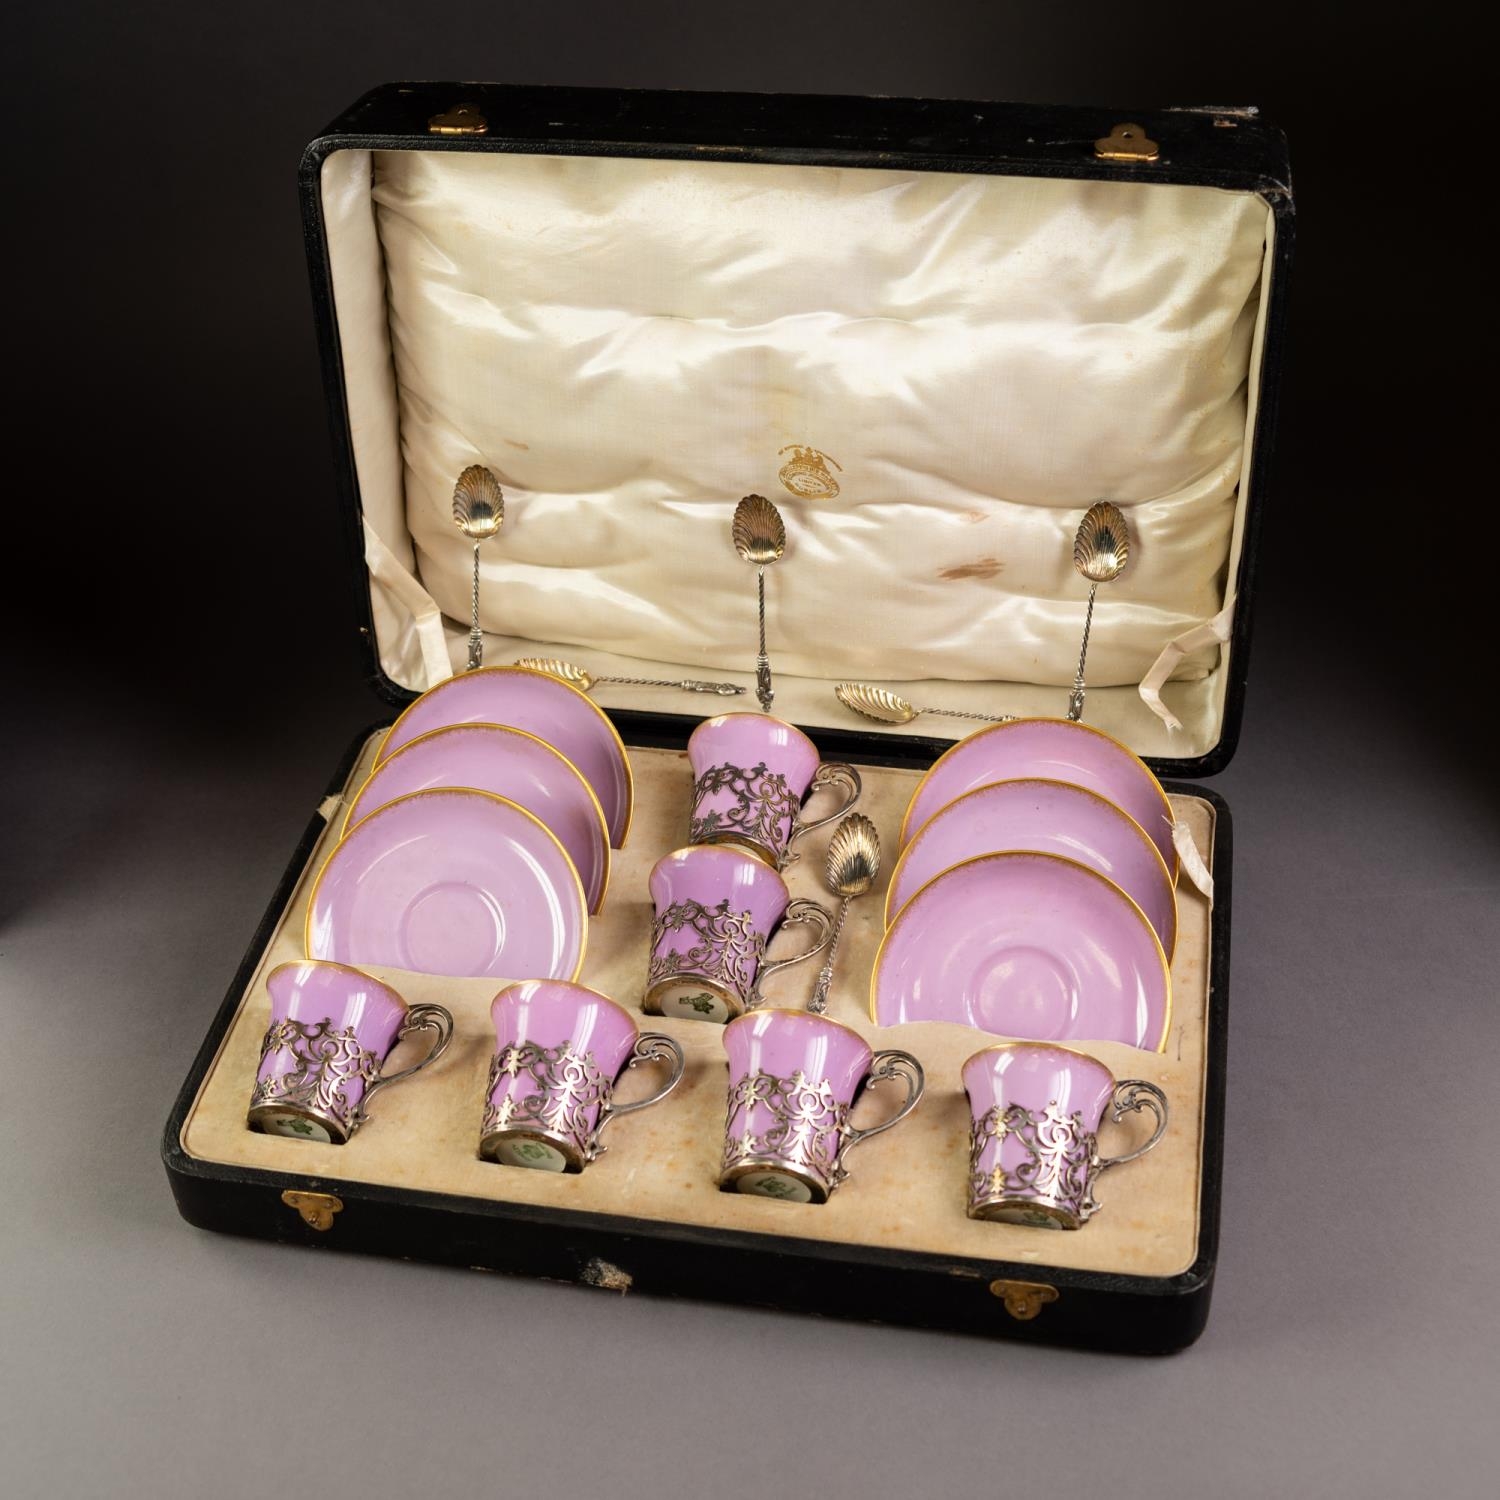 EARLY 20th CENTURY CASED SET OF SIX AYNSLEY PORCELAIN COFFEE CUPS AND SAUCERS, the cups removable